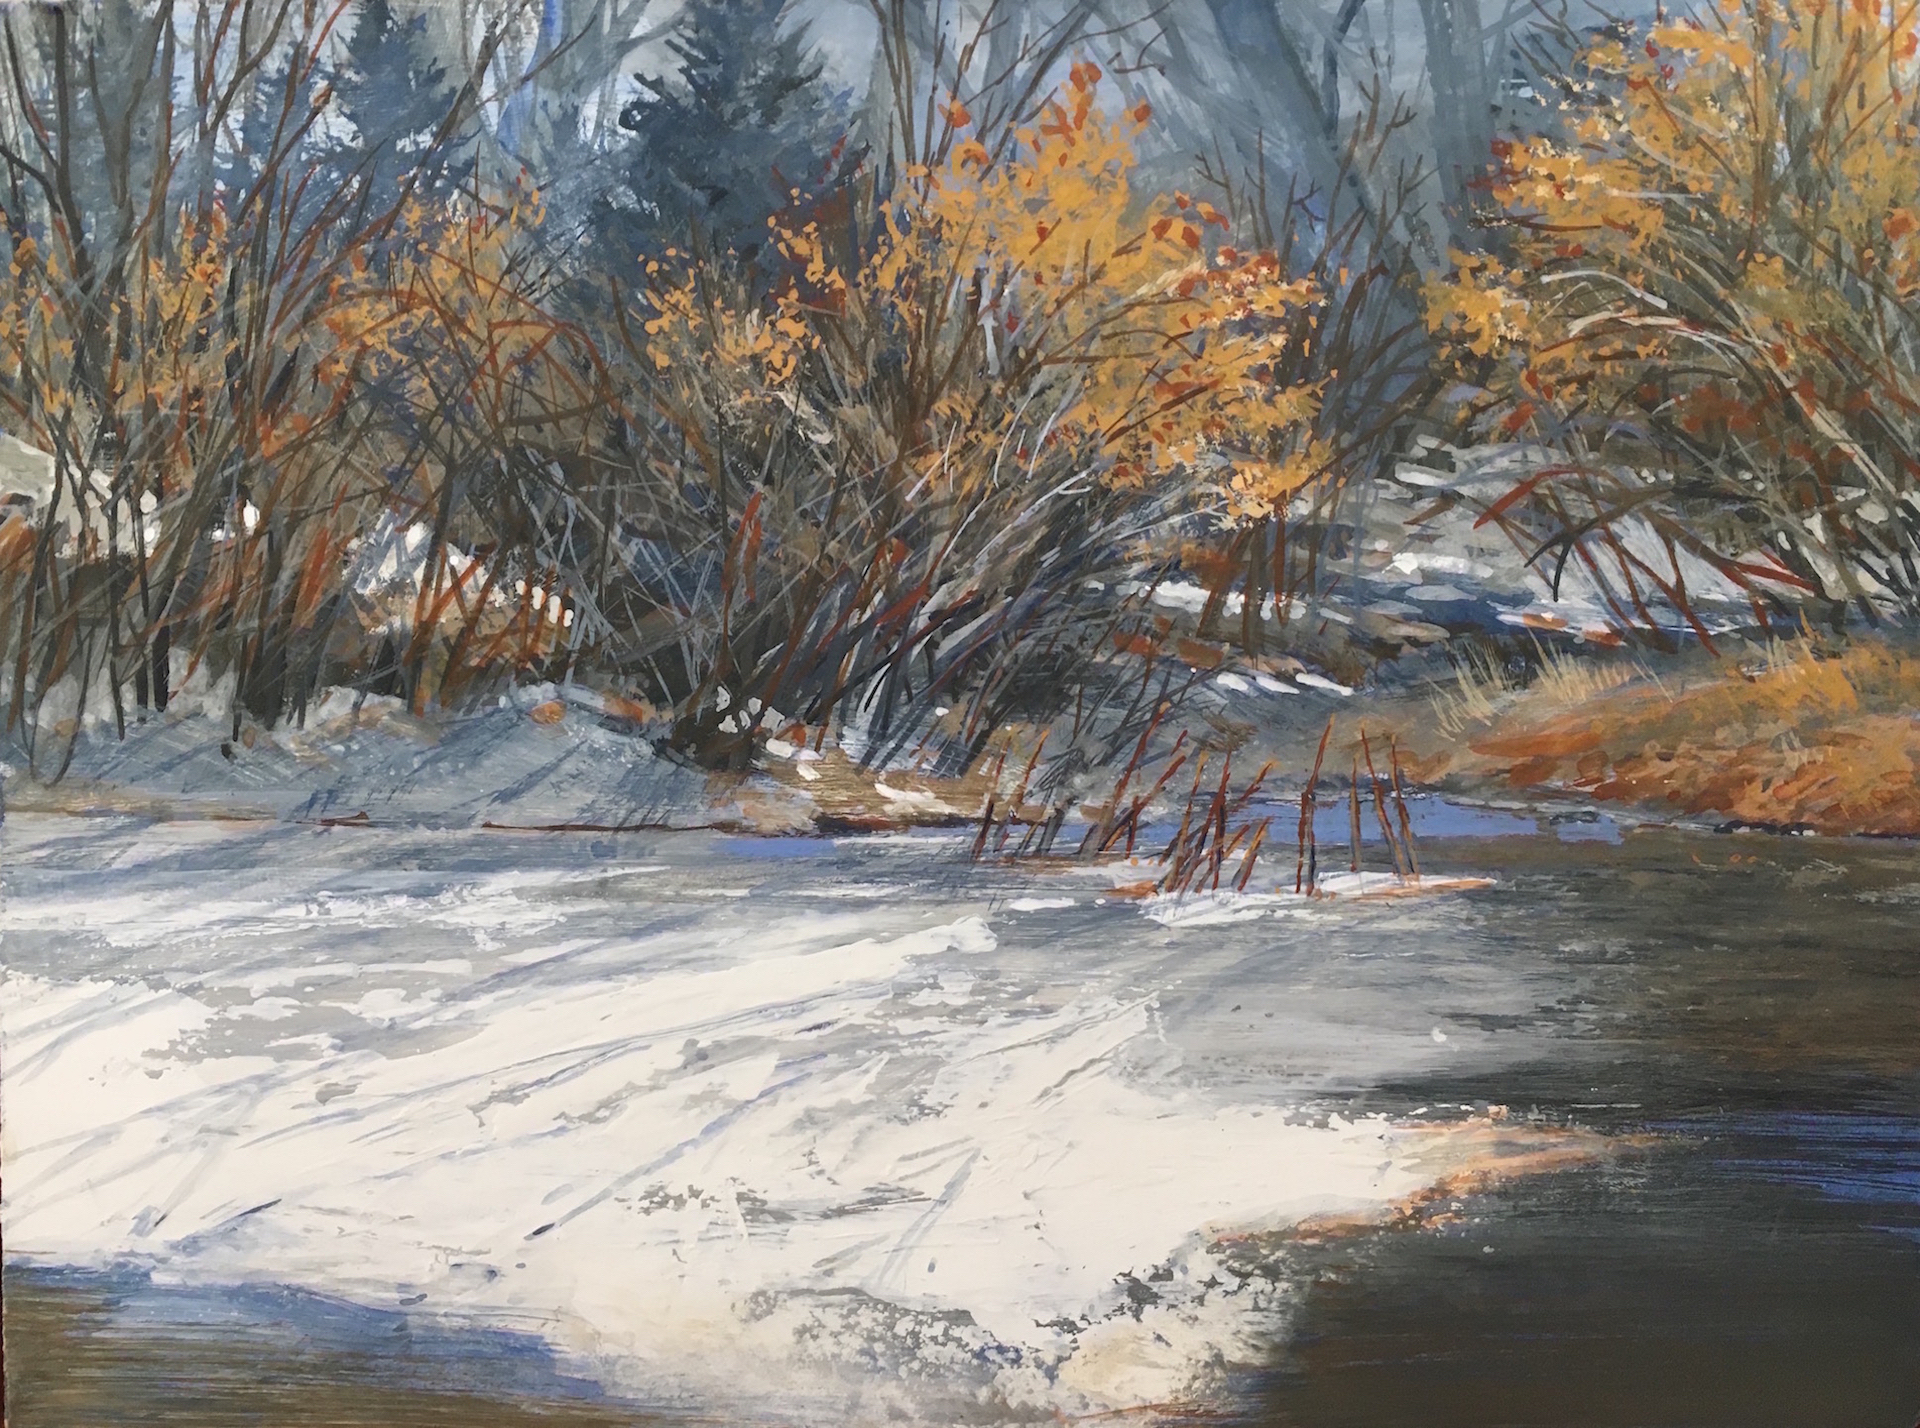 A painting of a river with snow on it.